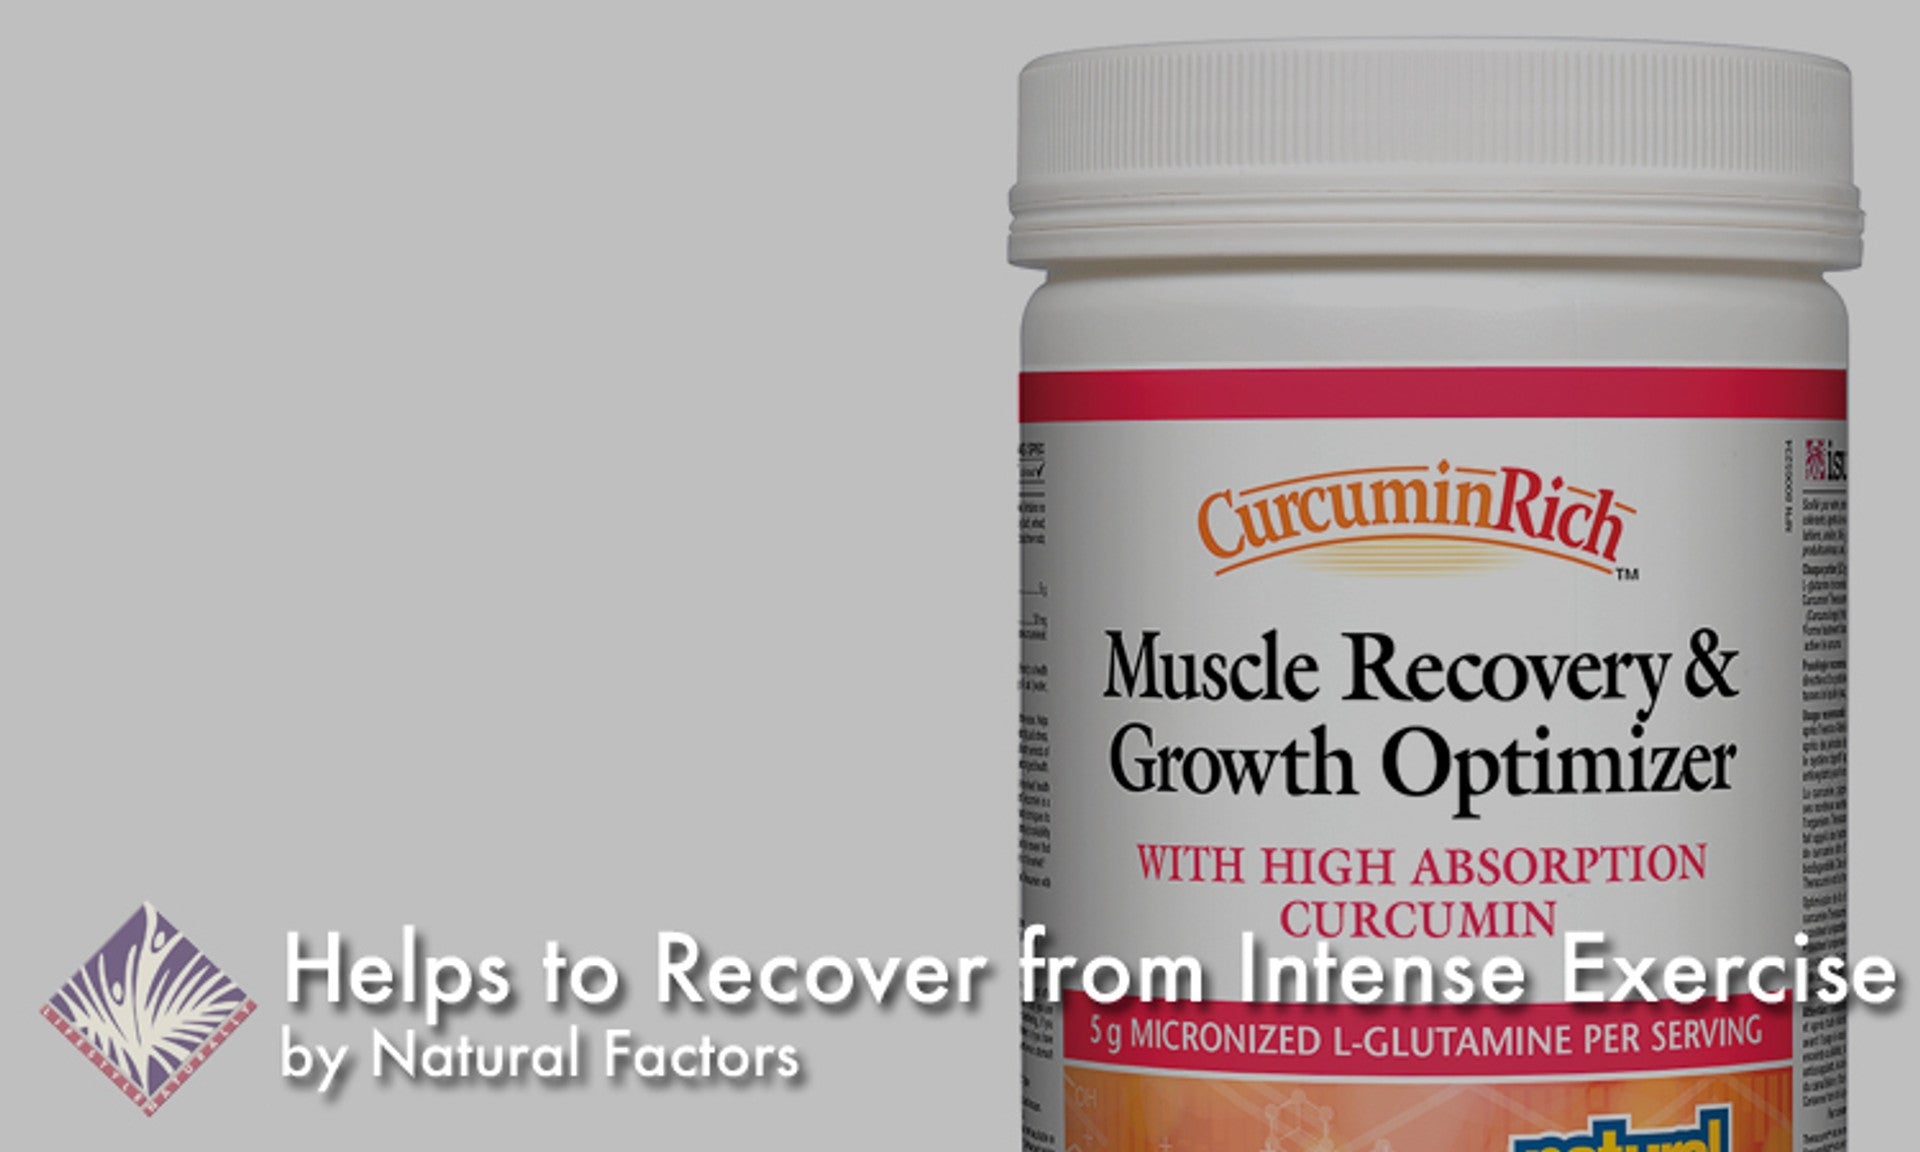 CurcuminRich Muscle Recovery & Growth Optimizer